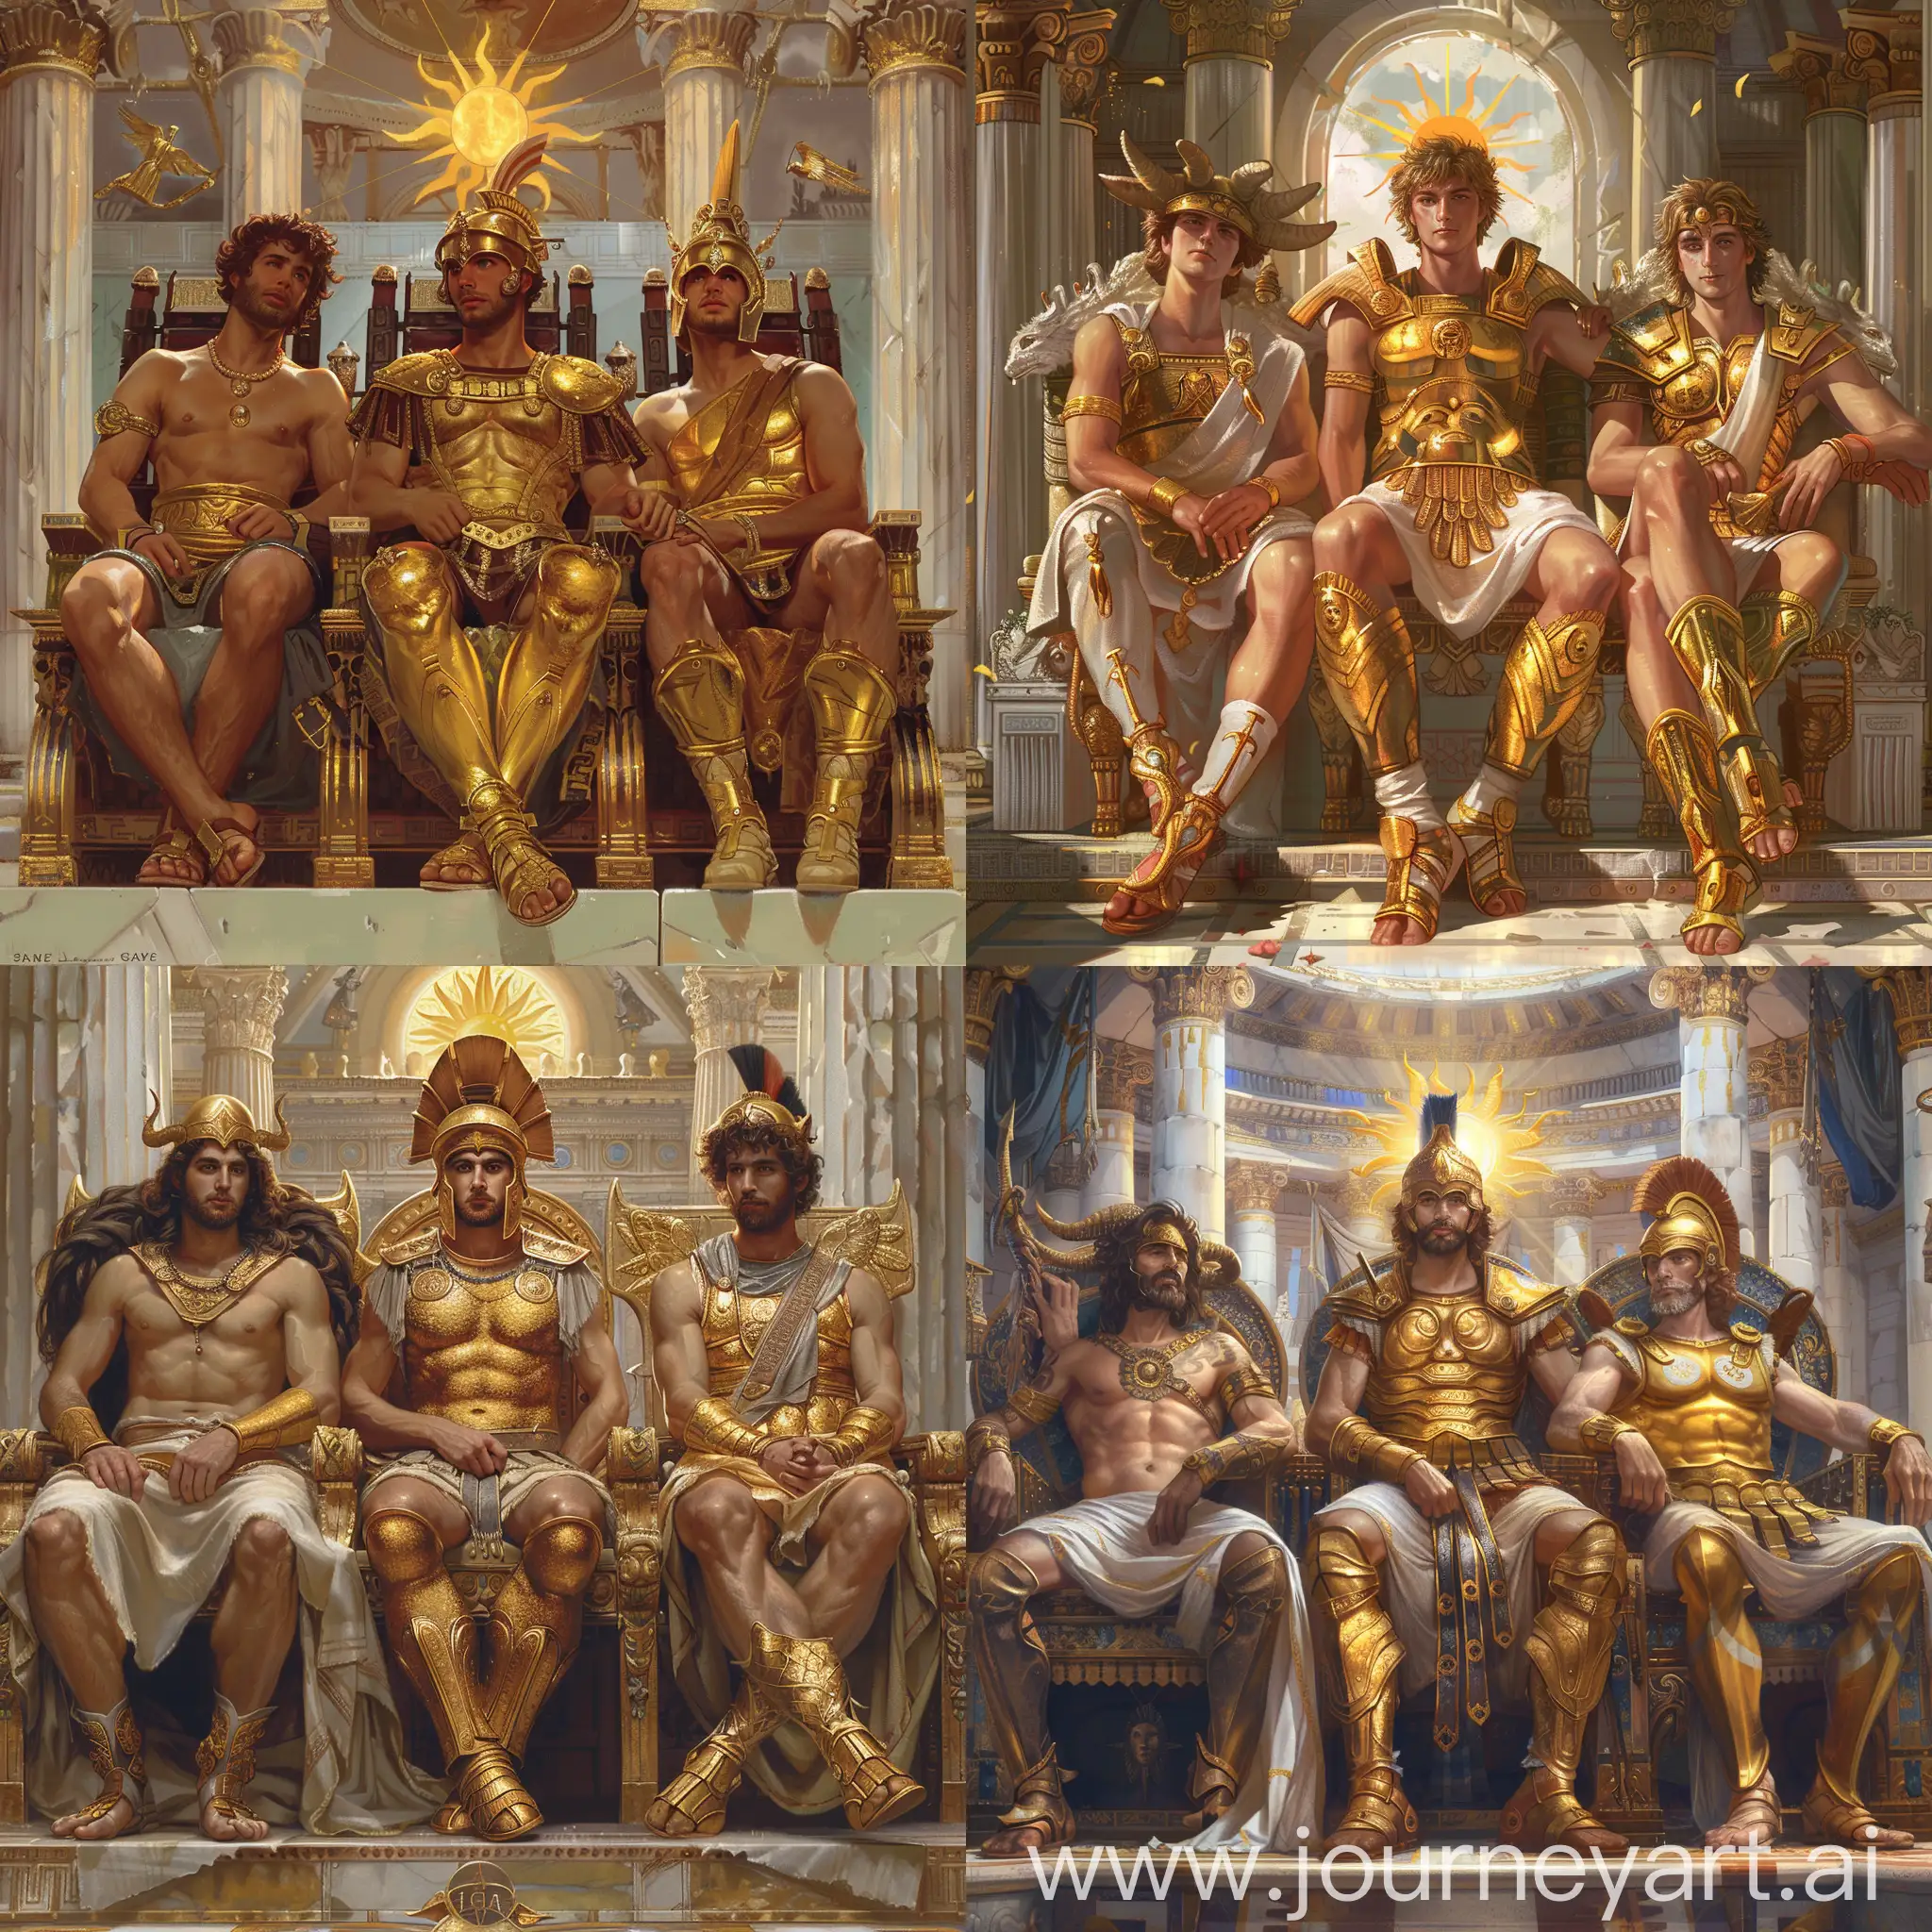 Mature-Greek-Gods-on-Thrones-in-a-Majestic-Temple